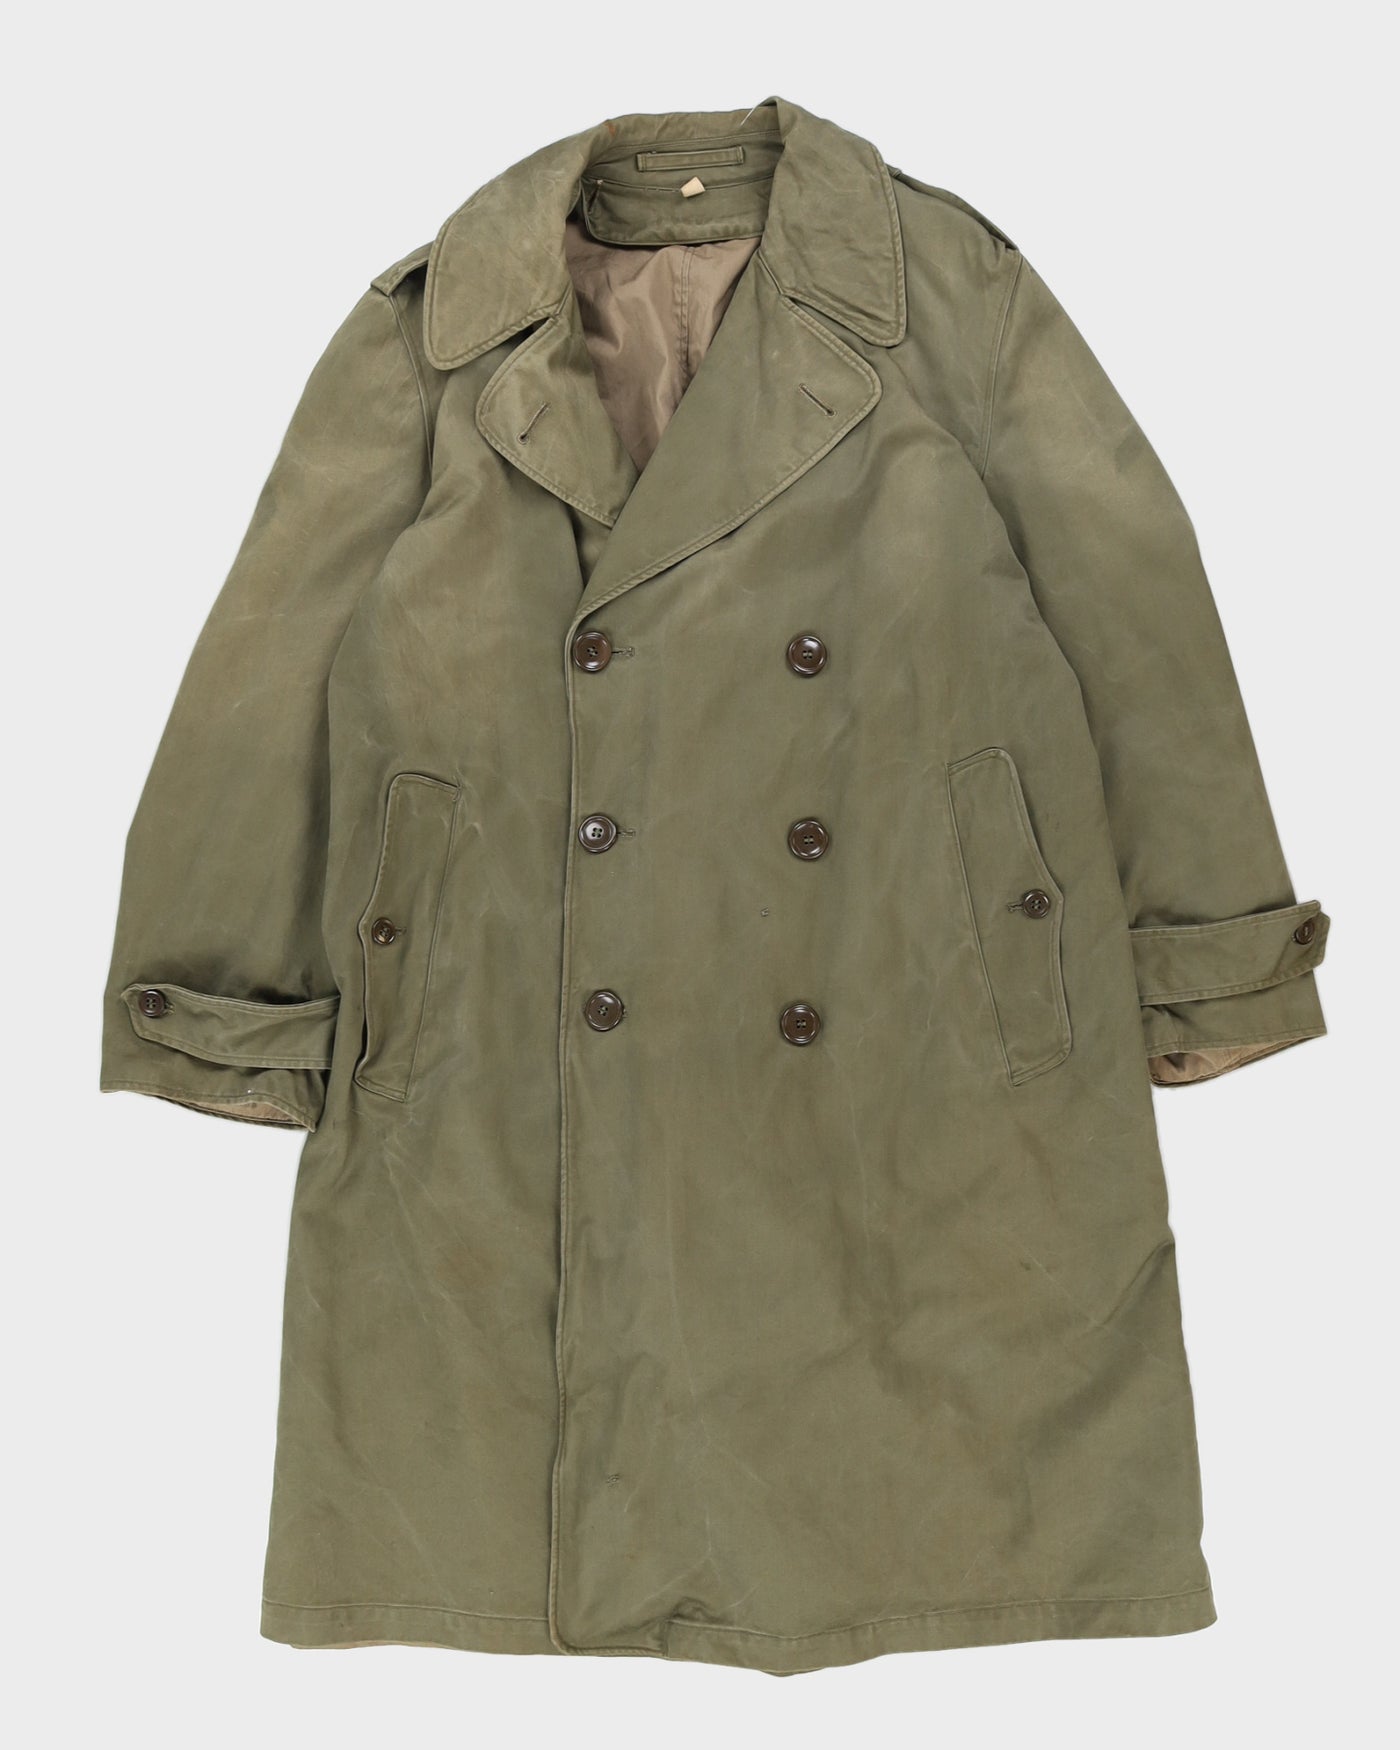 50s Vintage US Military Trench Coat - M